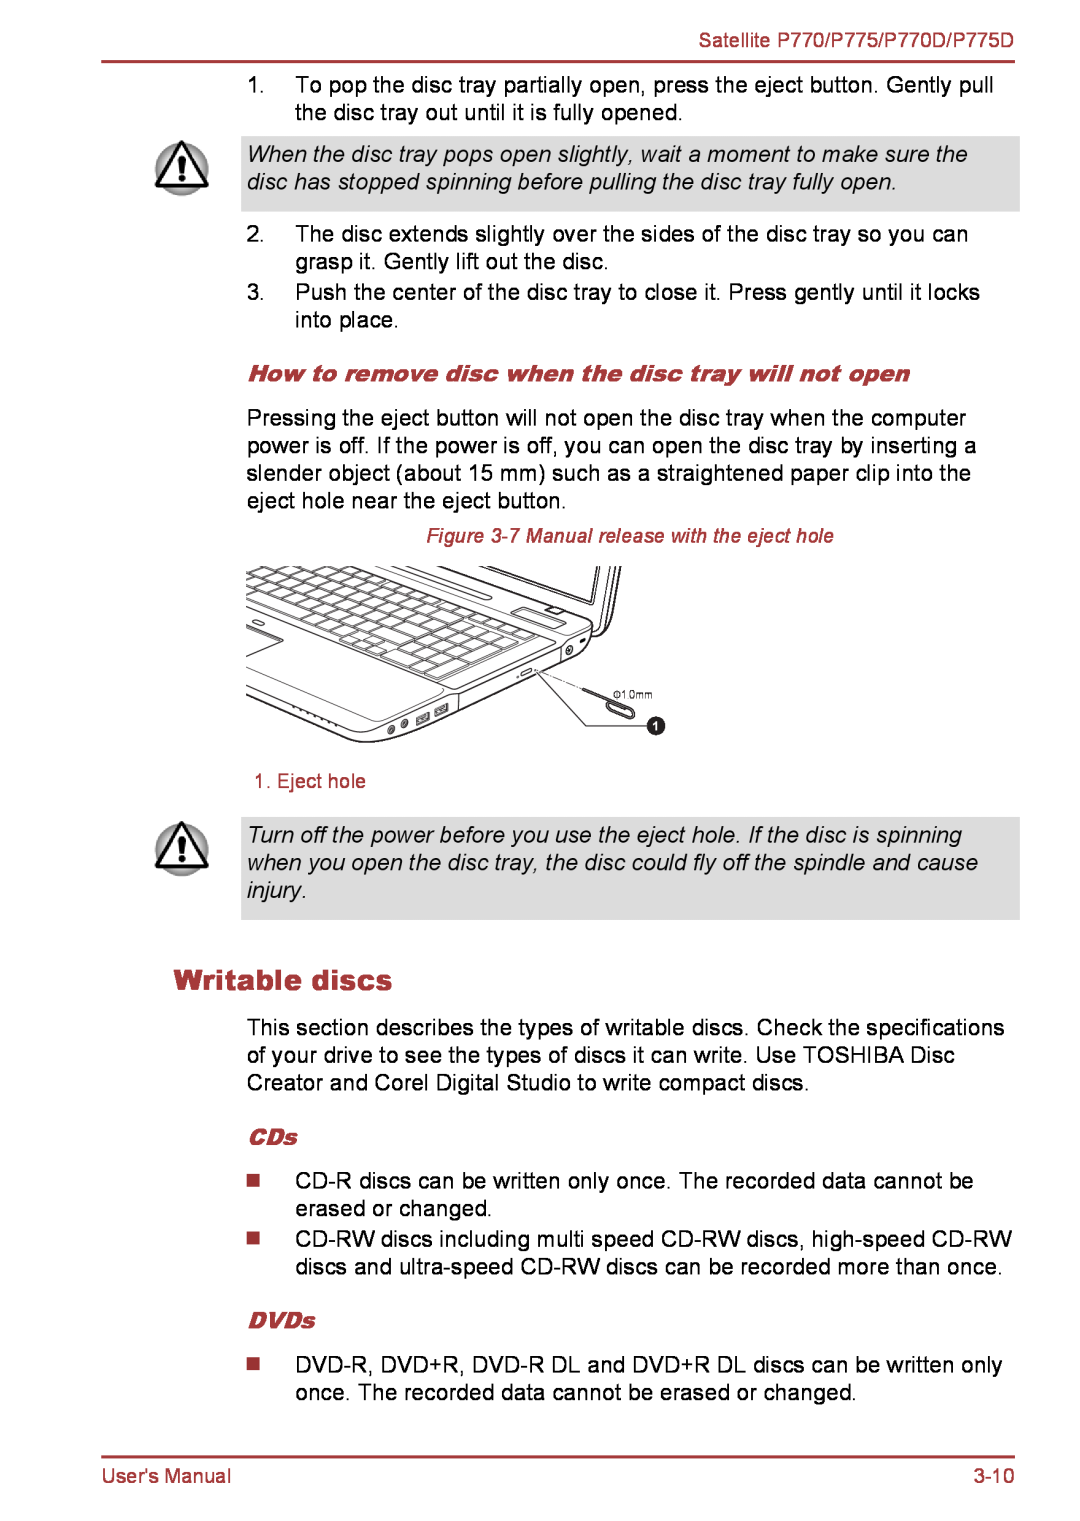 Toshiba P770 user manual Writable discs, How to remove disc when the disc tray will not open, DVDs 